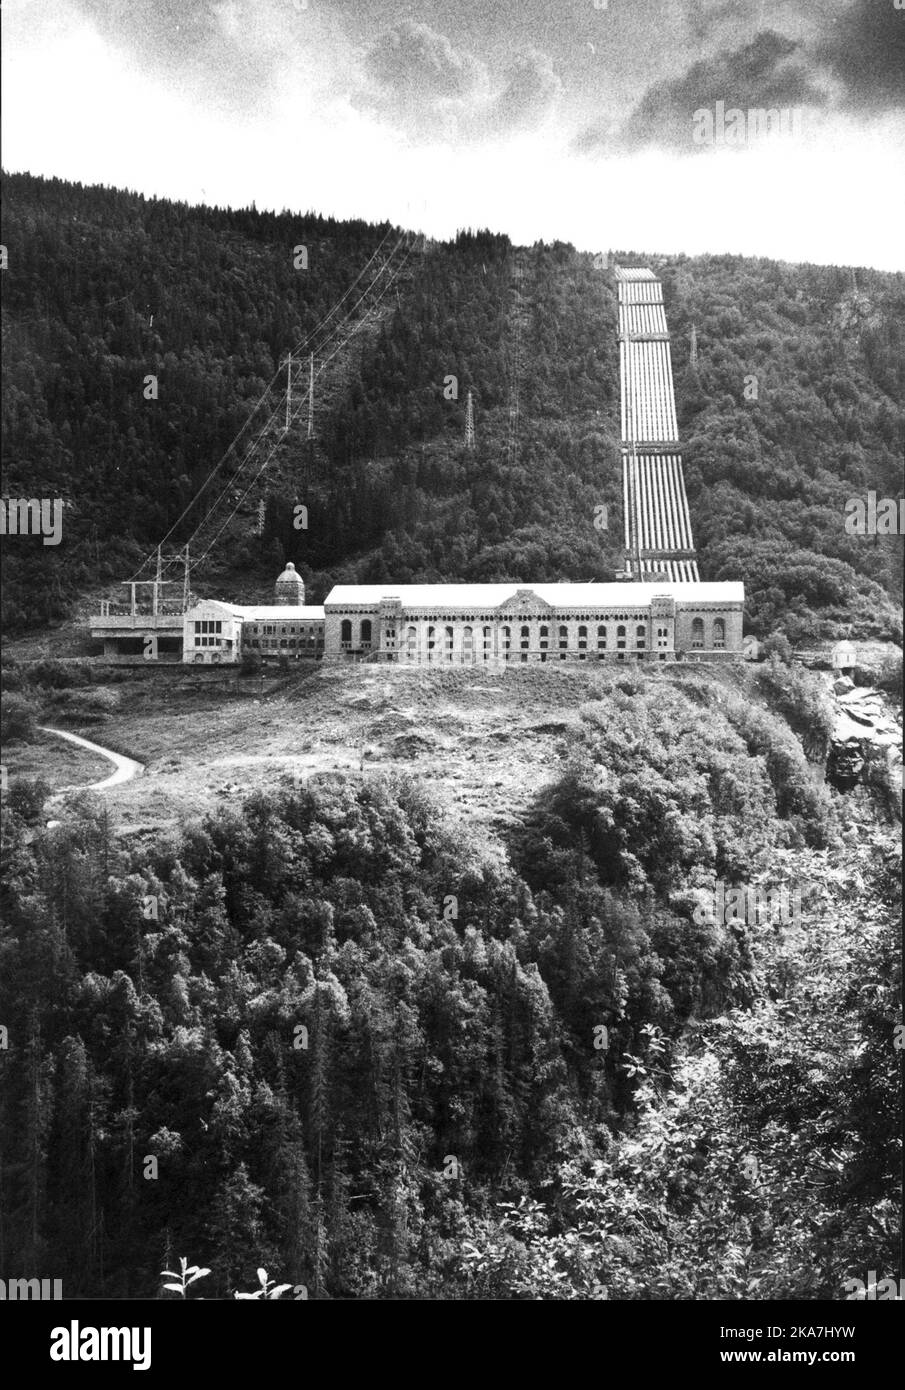 An undated picture of the Vemork Hydroelectric Plant in Norway Stock Photo